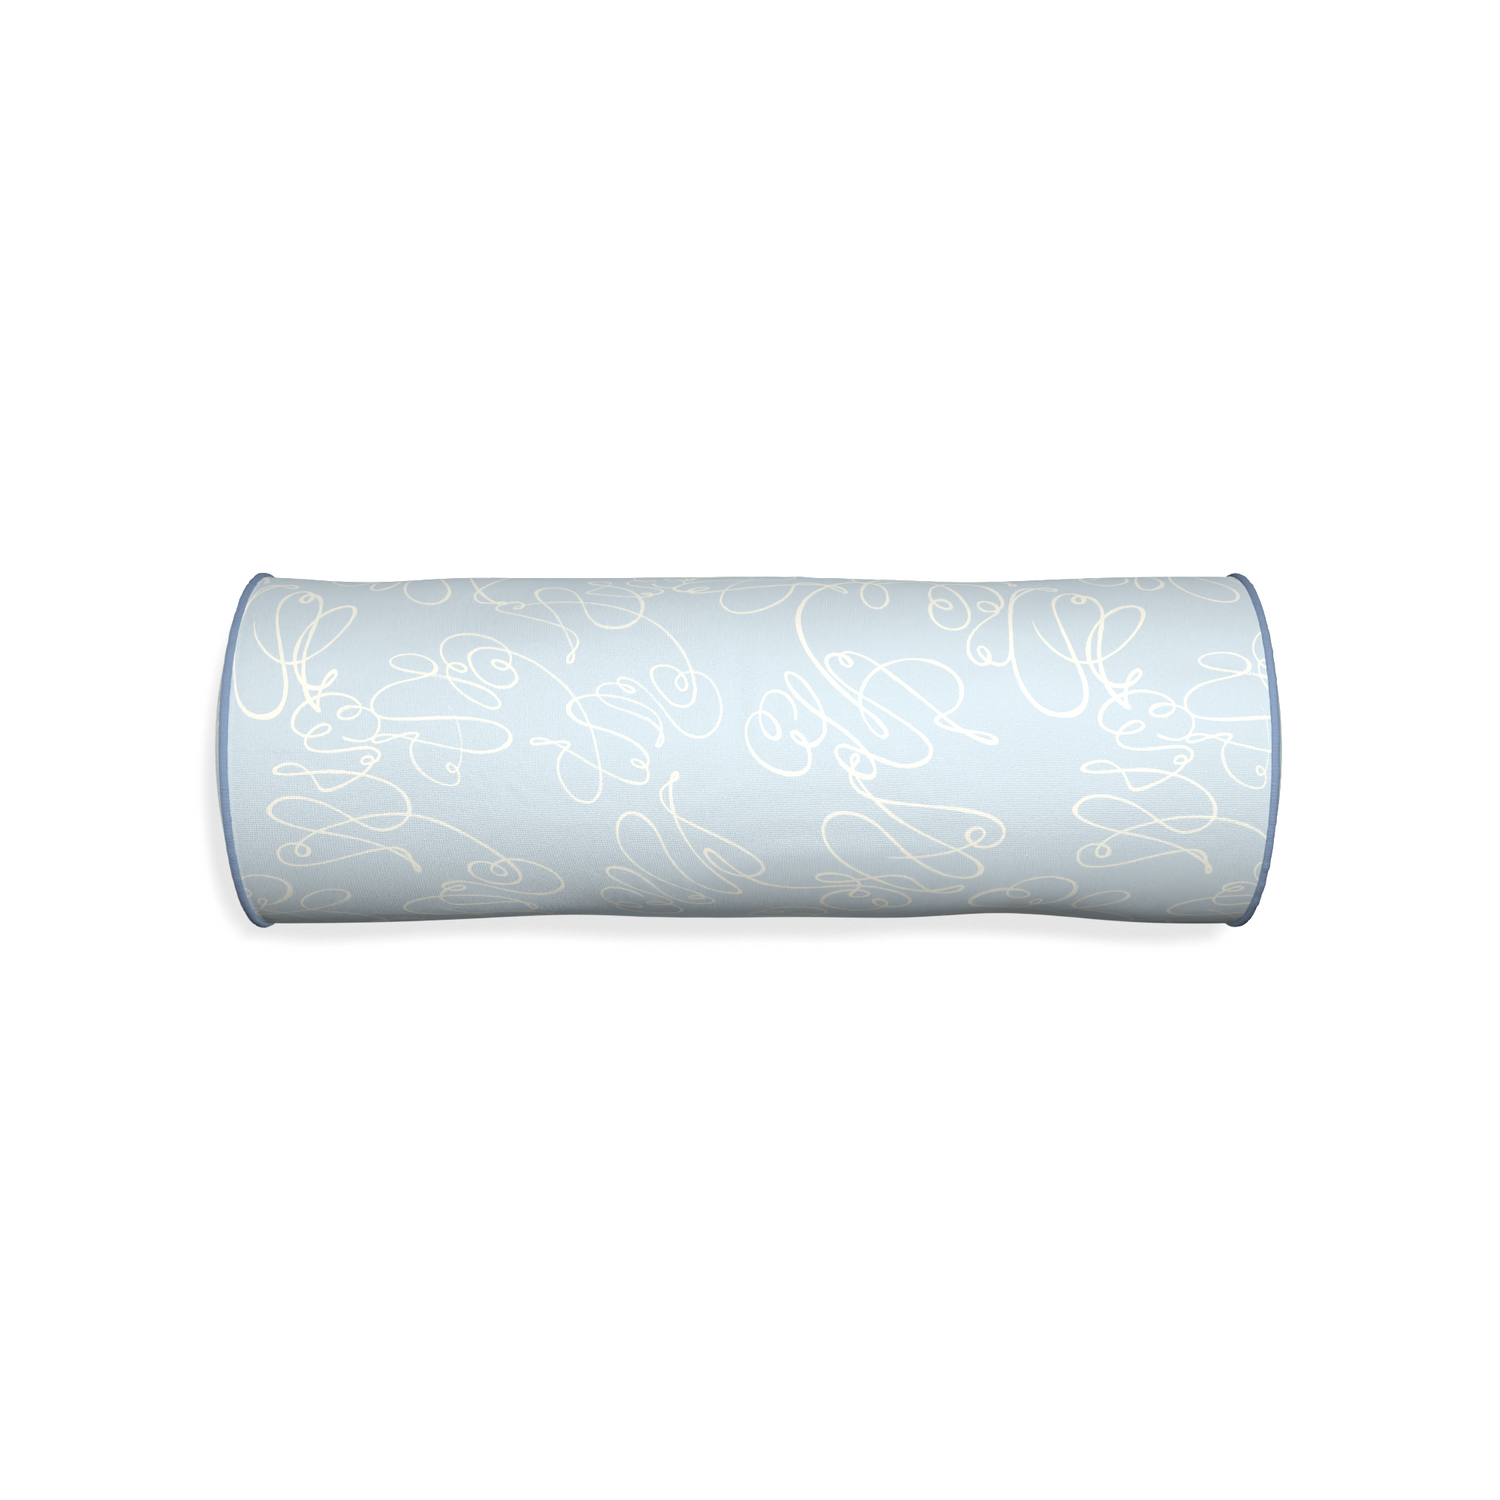 Bolster mirabella custom powder blue abstractpillow with sky piping on white background